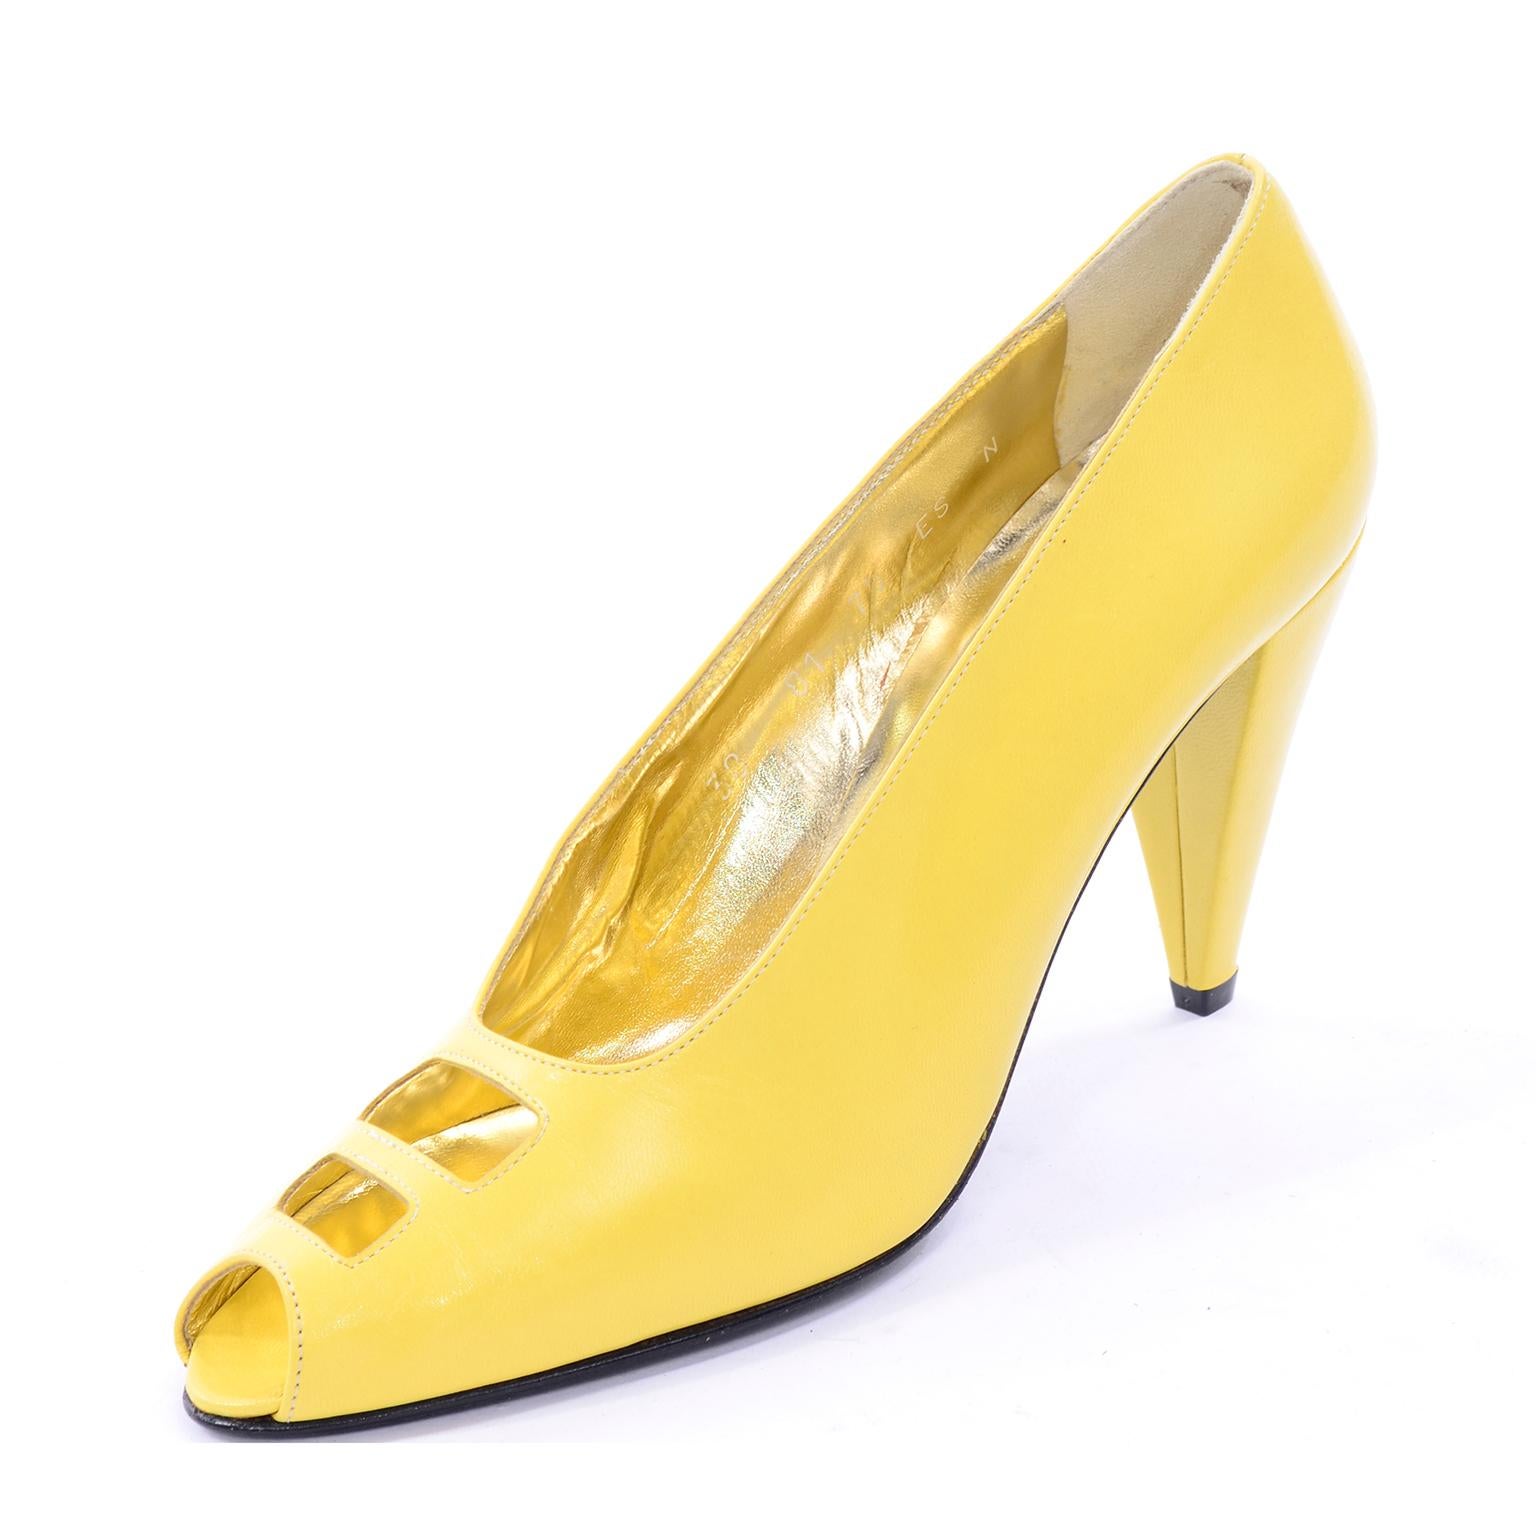 These are gorgeous yellow leather Escada peep toe heels from the 1980's. They have rectangular cutouts in the uppers and were made in Italy.. Excellent condition and have never been worn! 7.5AA is the marked size. HEEL: 3.75